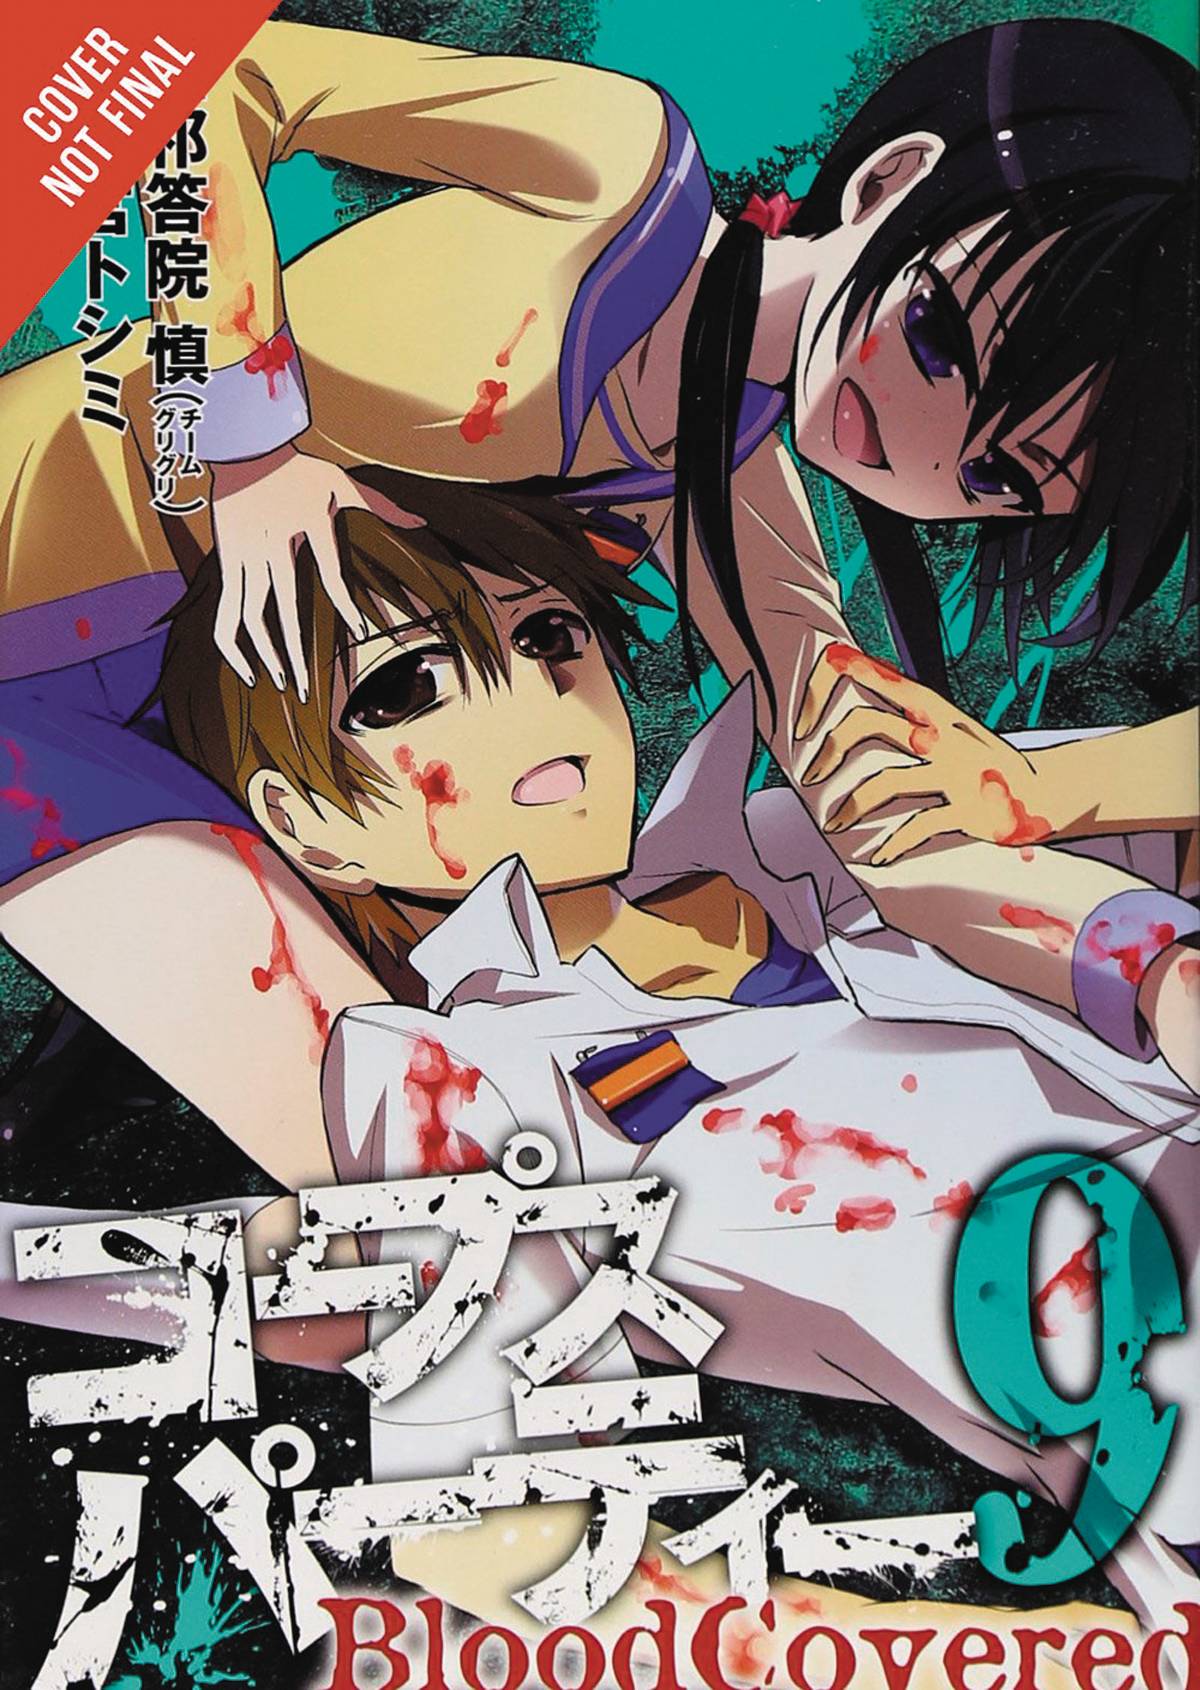 CORPSE PARTY BLOOD COVERED GN VOL 05